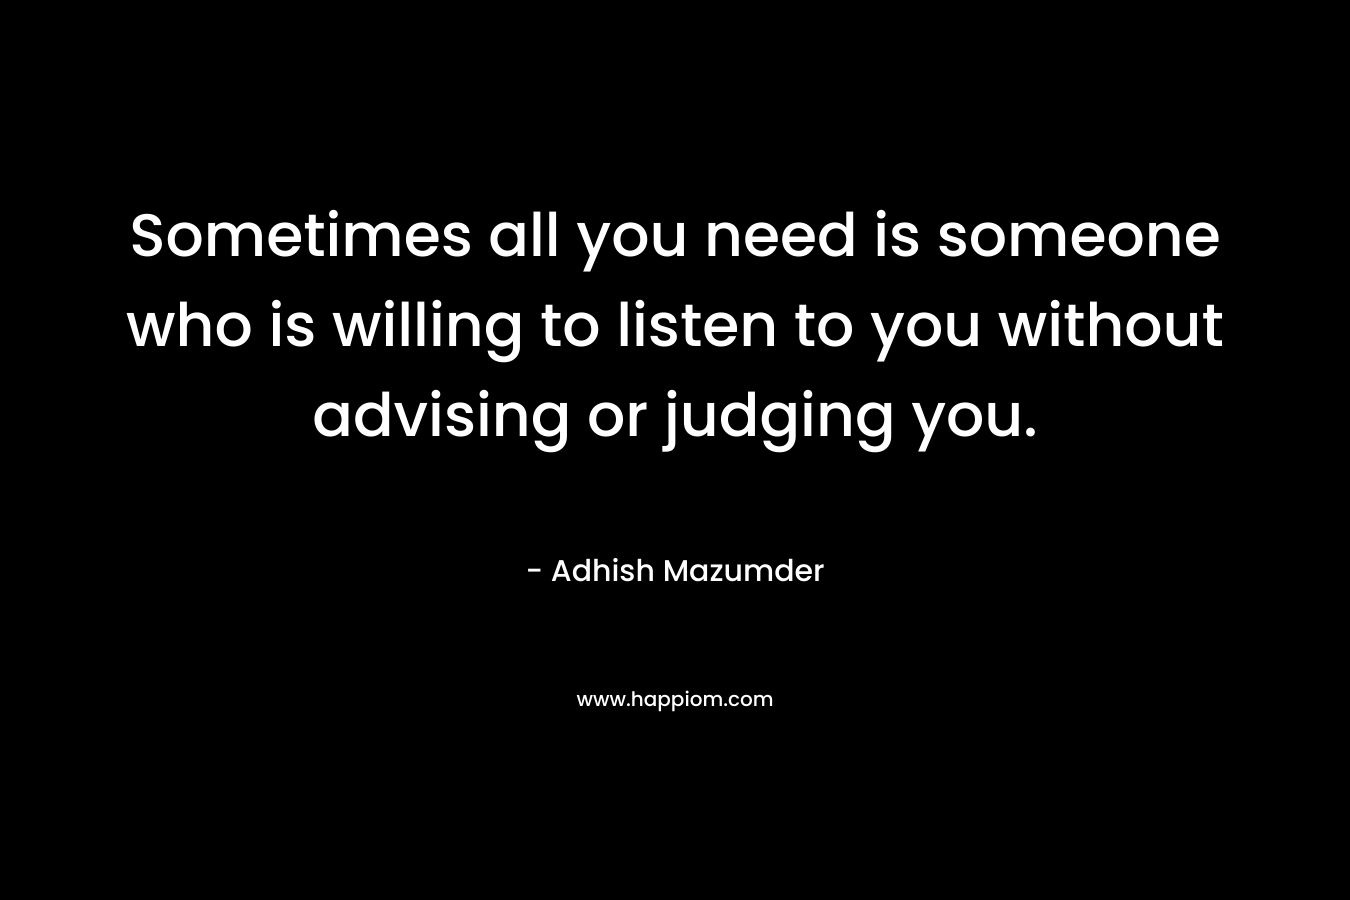 Sometimes all you need is someone who is willing to listen to you without advising or judging you.